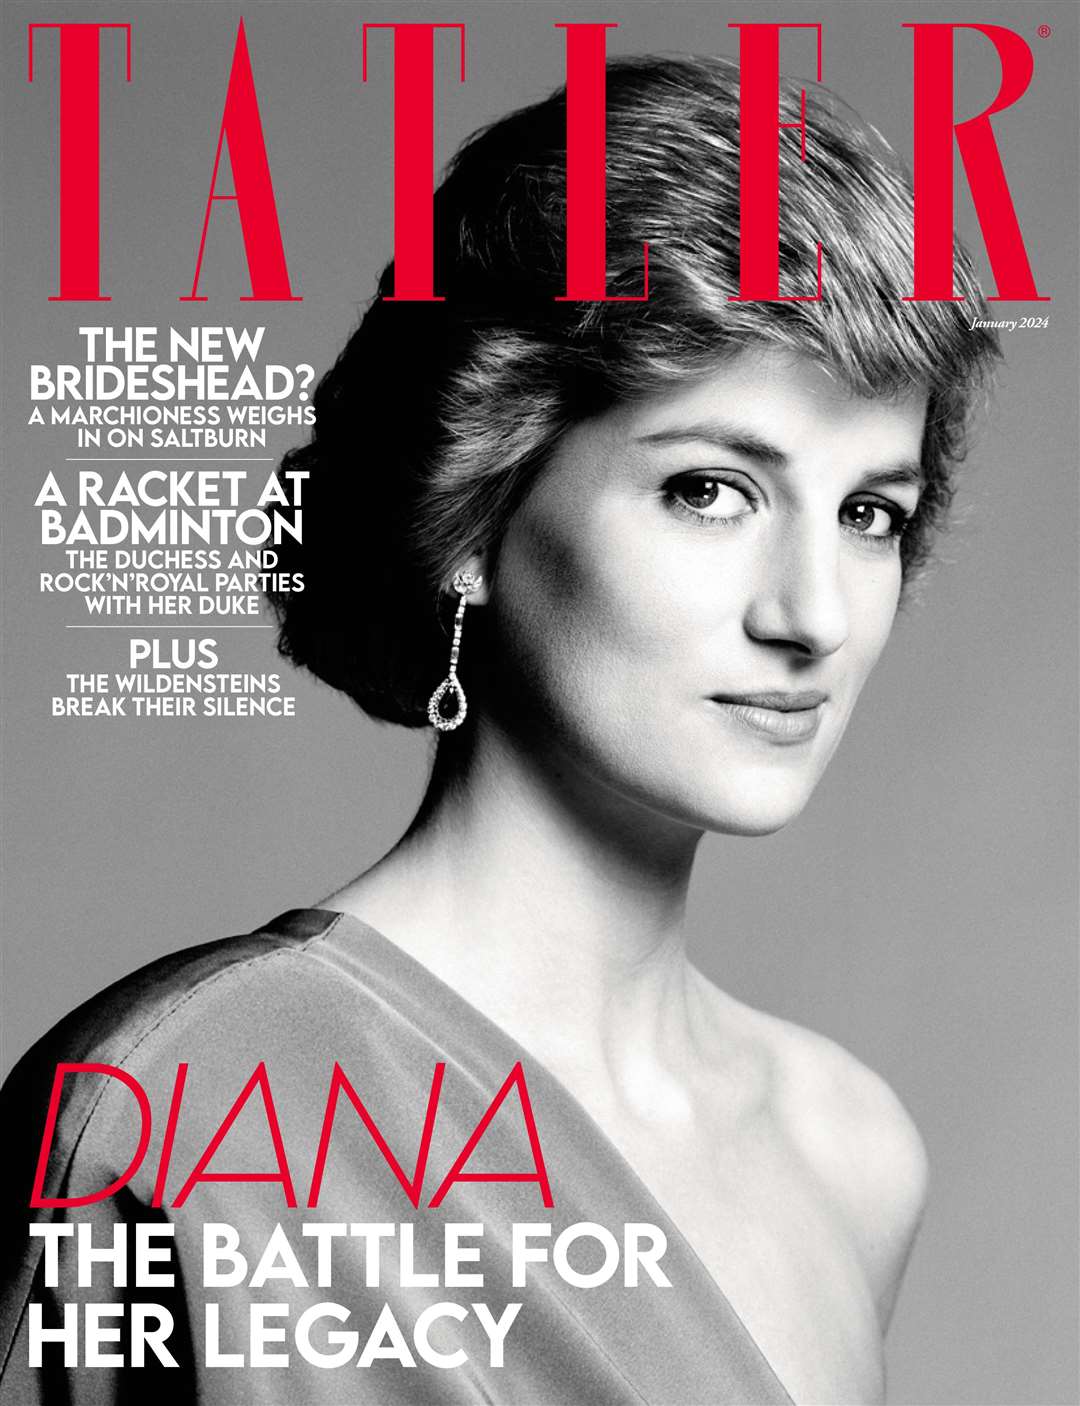 The cover of Tatler featuring the photo of Diana by David Bailey (Tatler/David Bailey/PA)